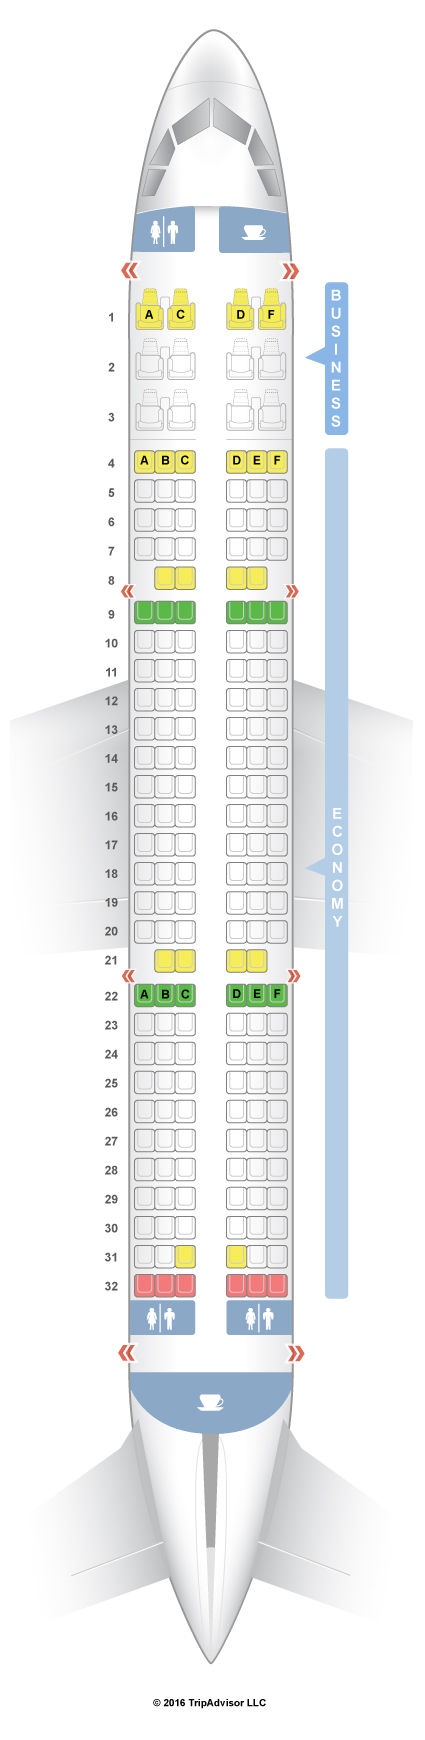 American Airlines Seating Chart A321